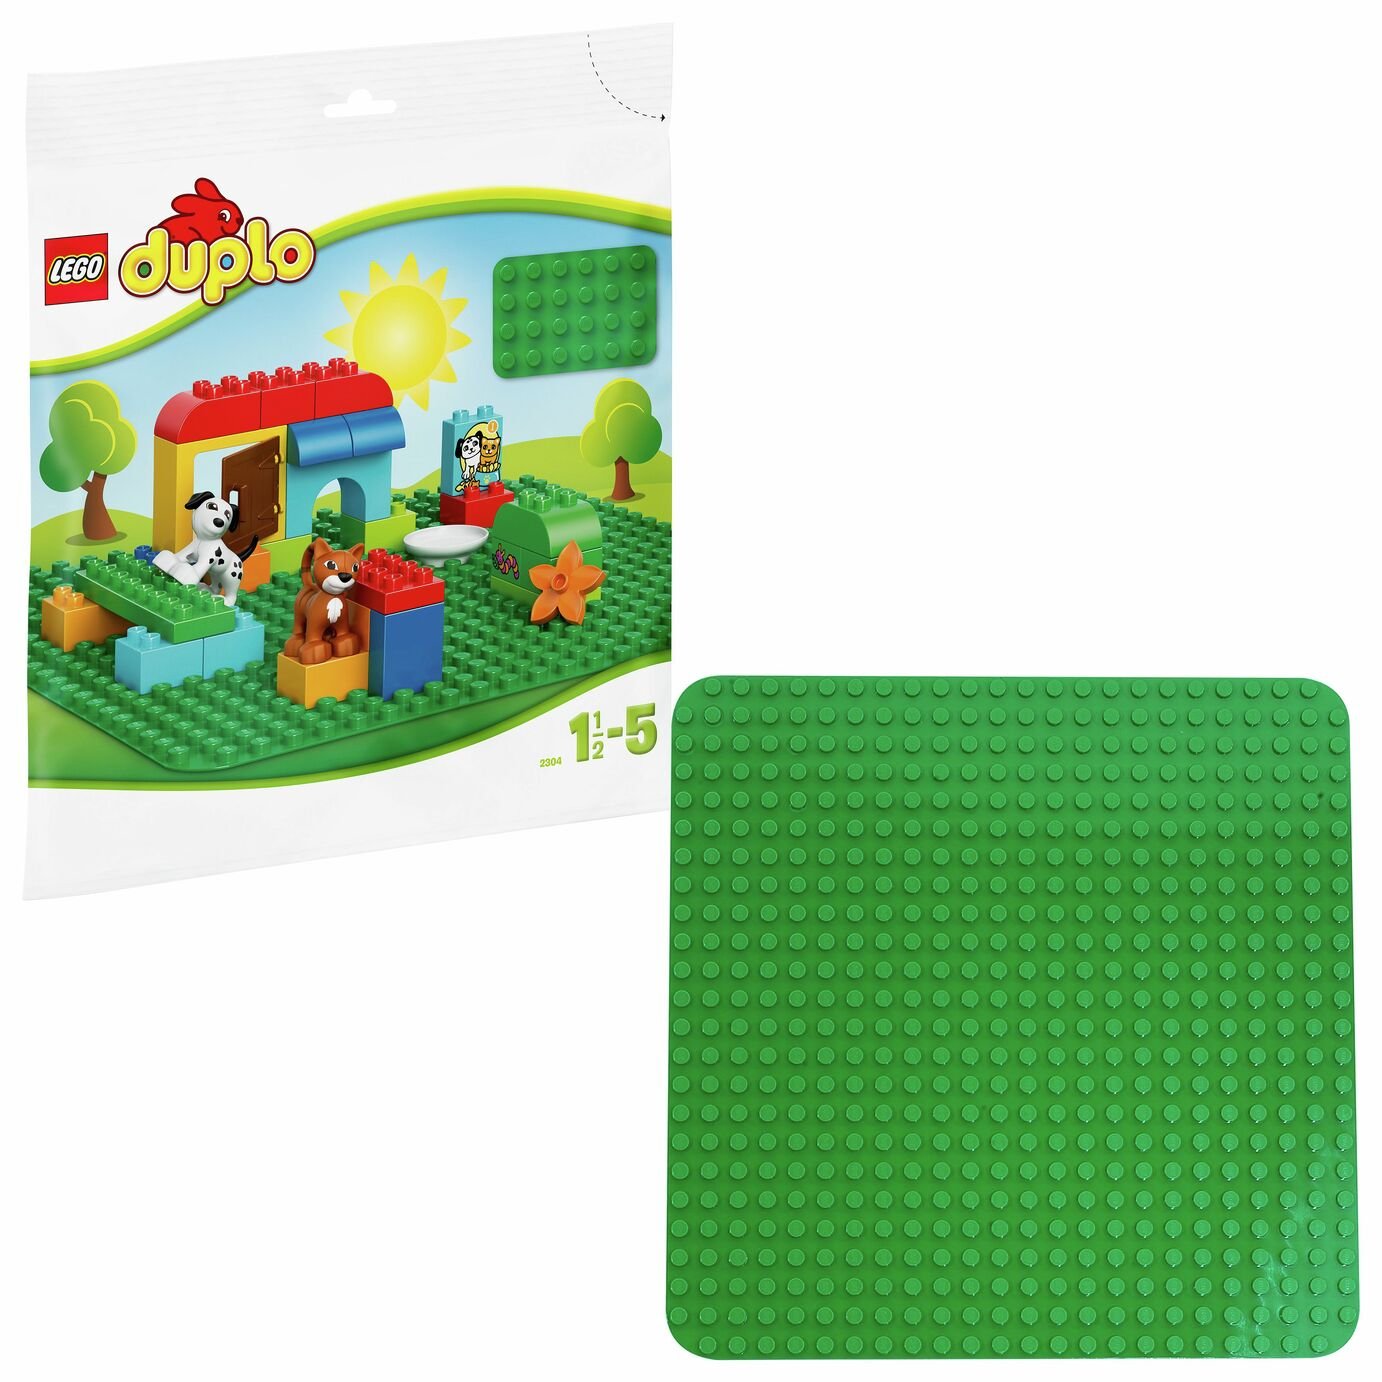 LEGO DUPLO Large Green Building Plate - 2304